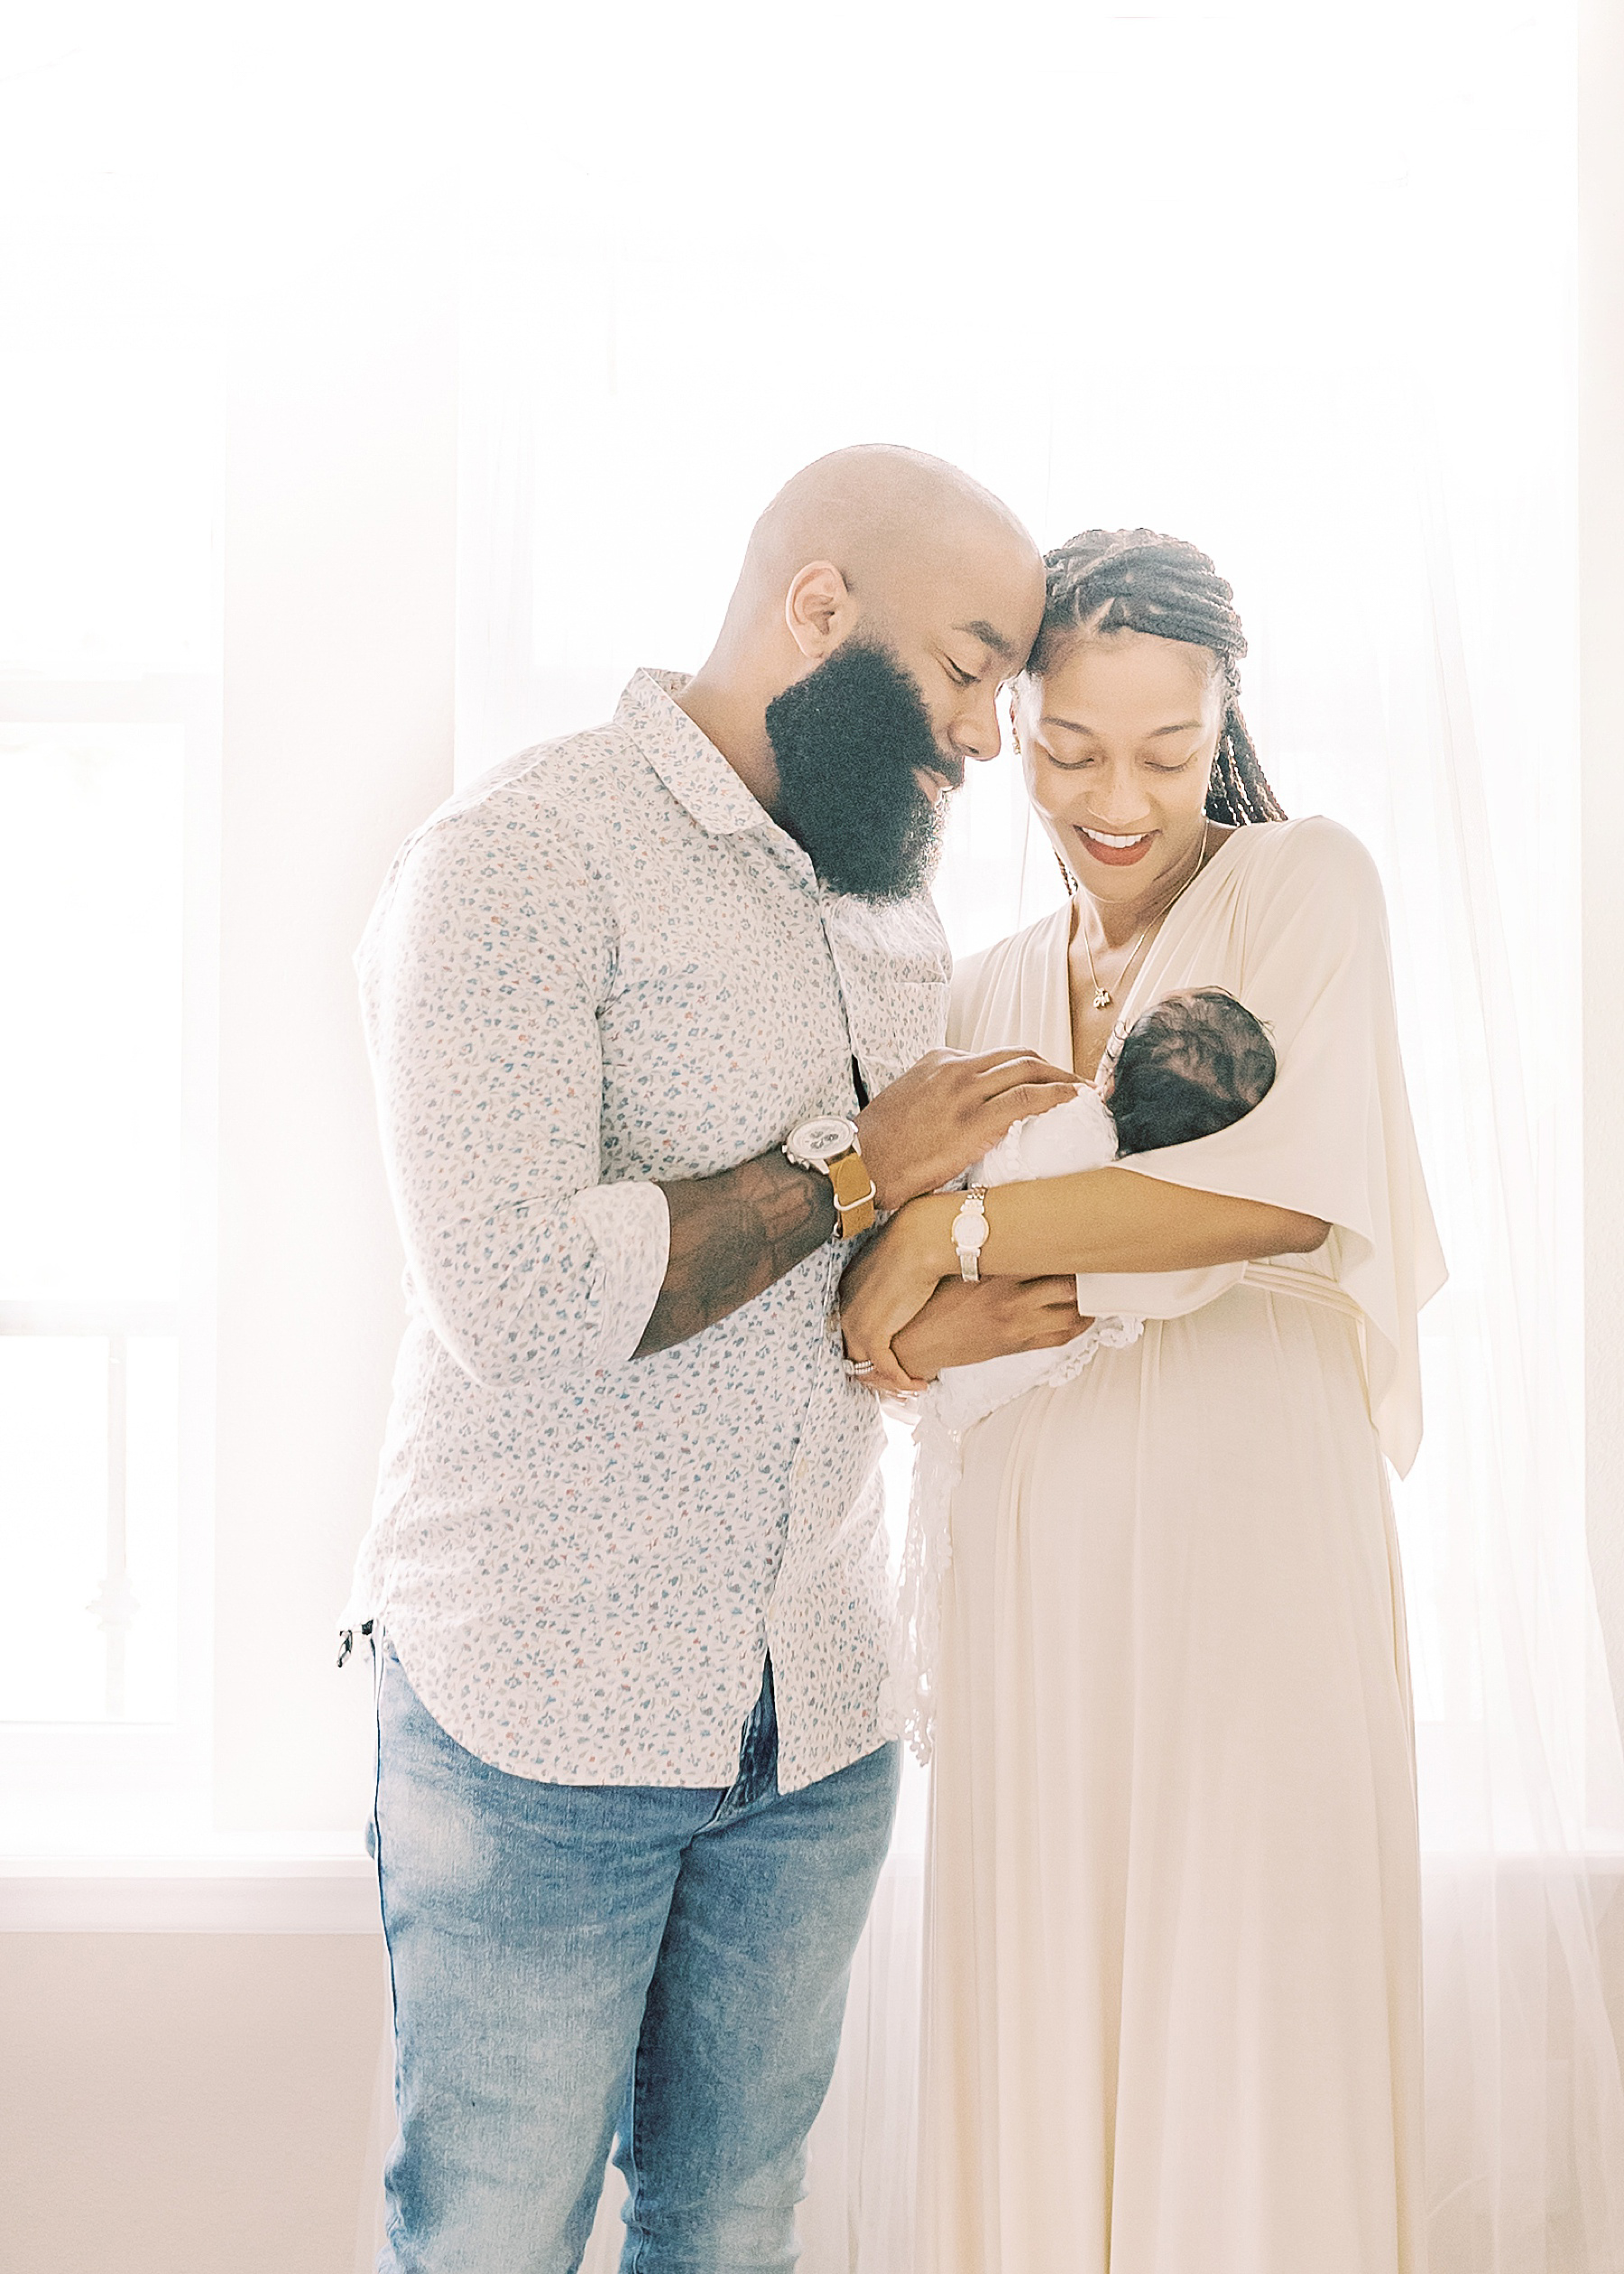 black man and black woman holding a baby girl wrapped in a white lace blanket in front of an airy window with white sheers